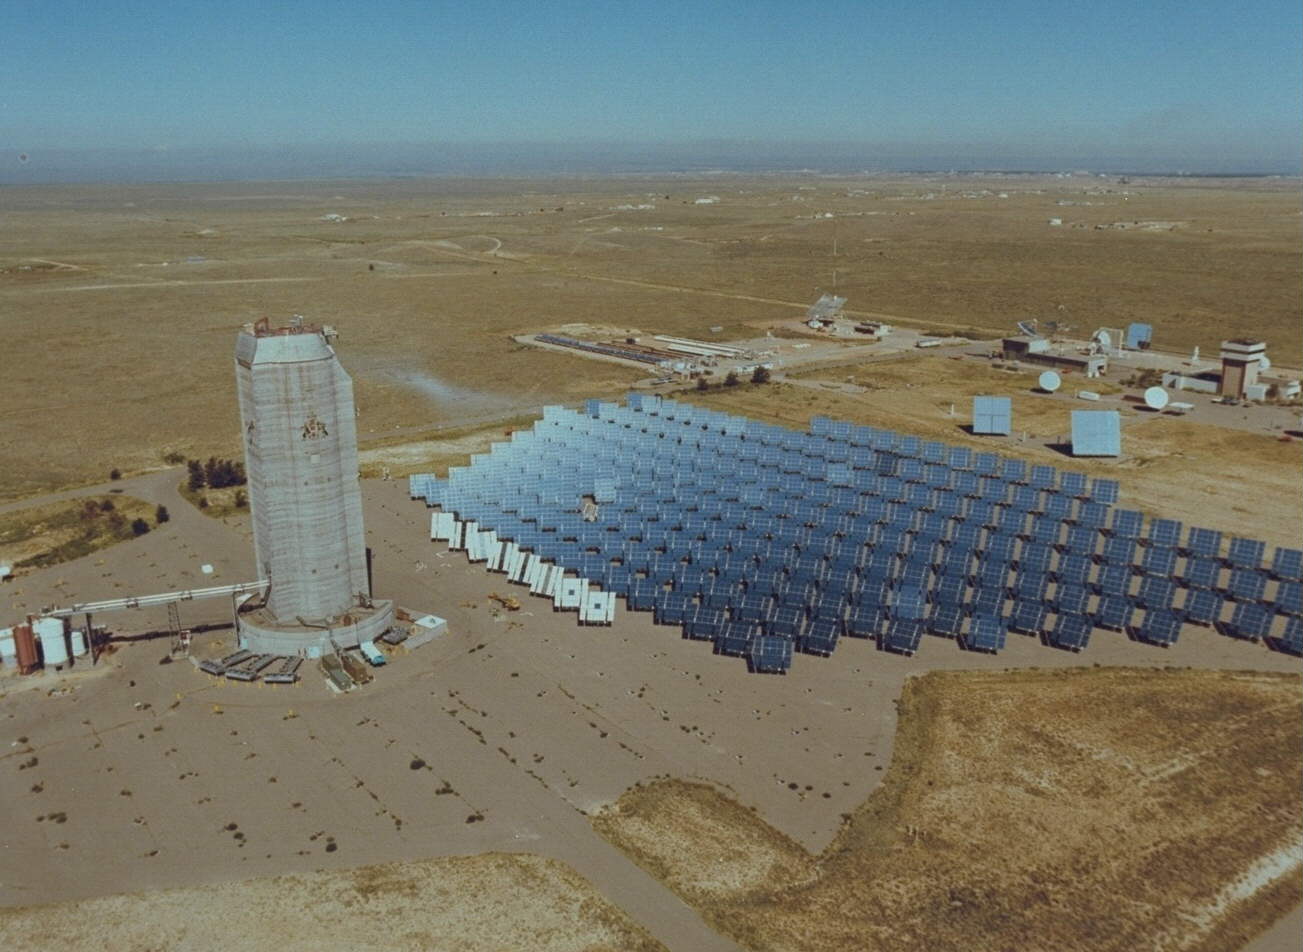 Solar News: First Large Scale 24/7 Solar Power Plant to be Constructed 